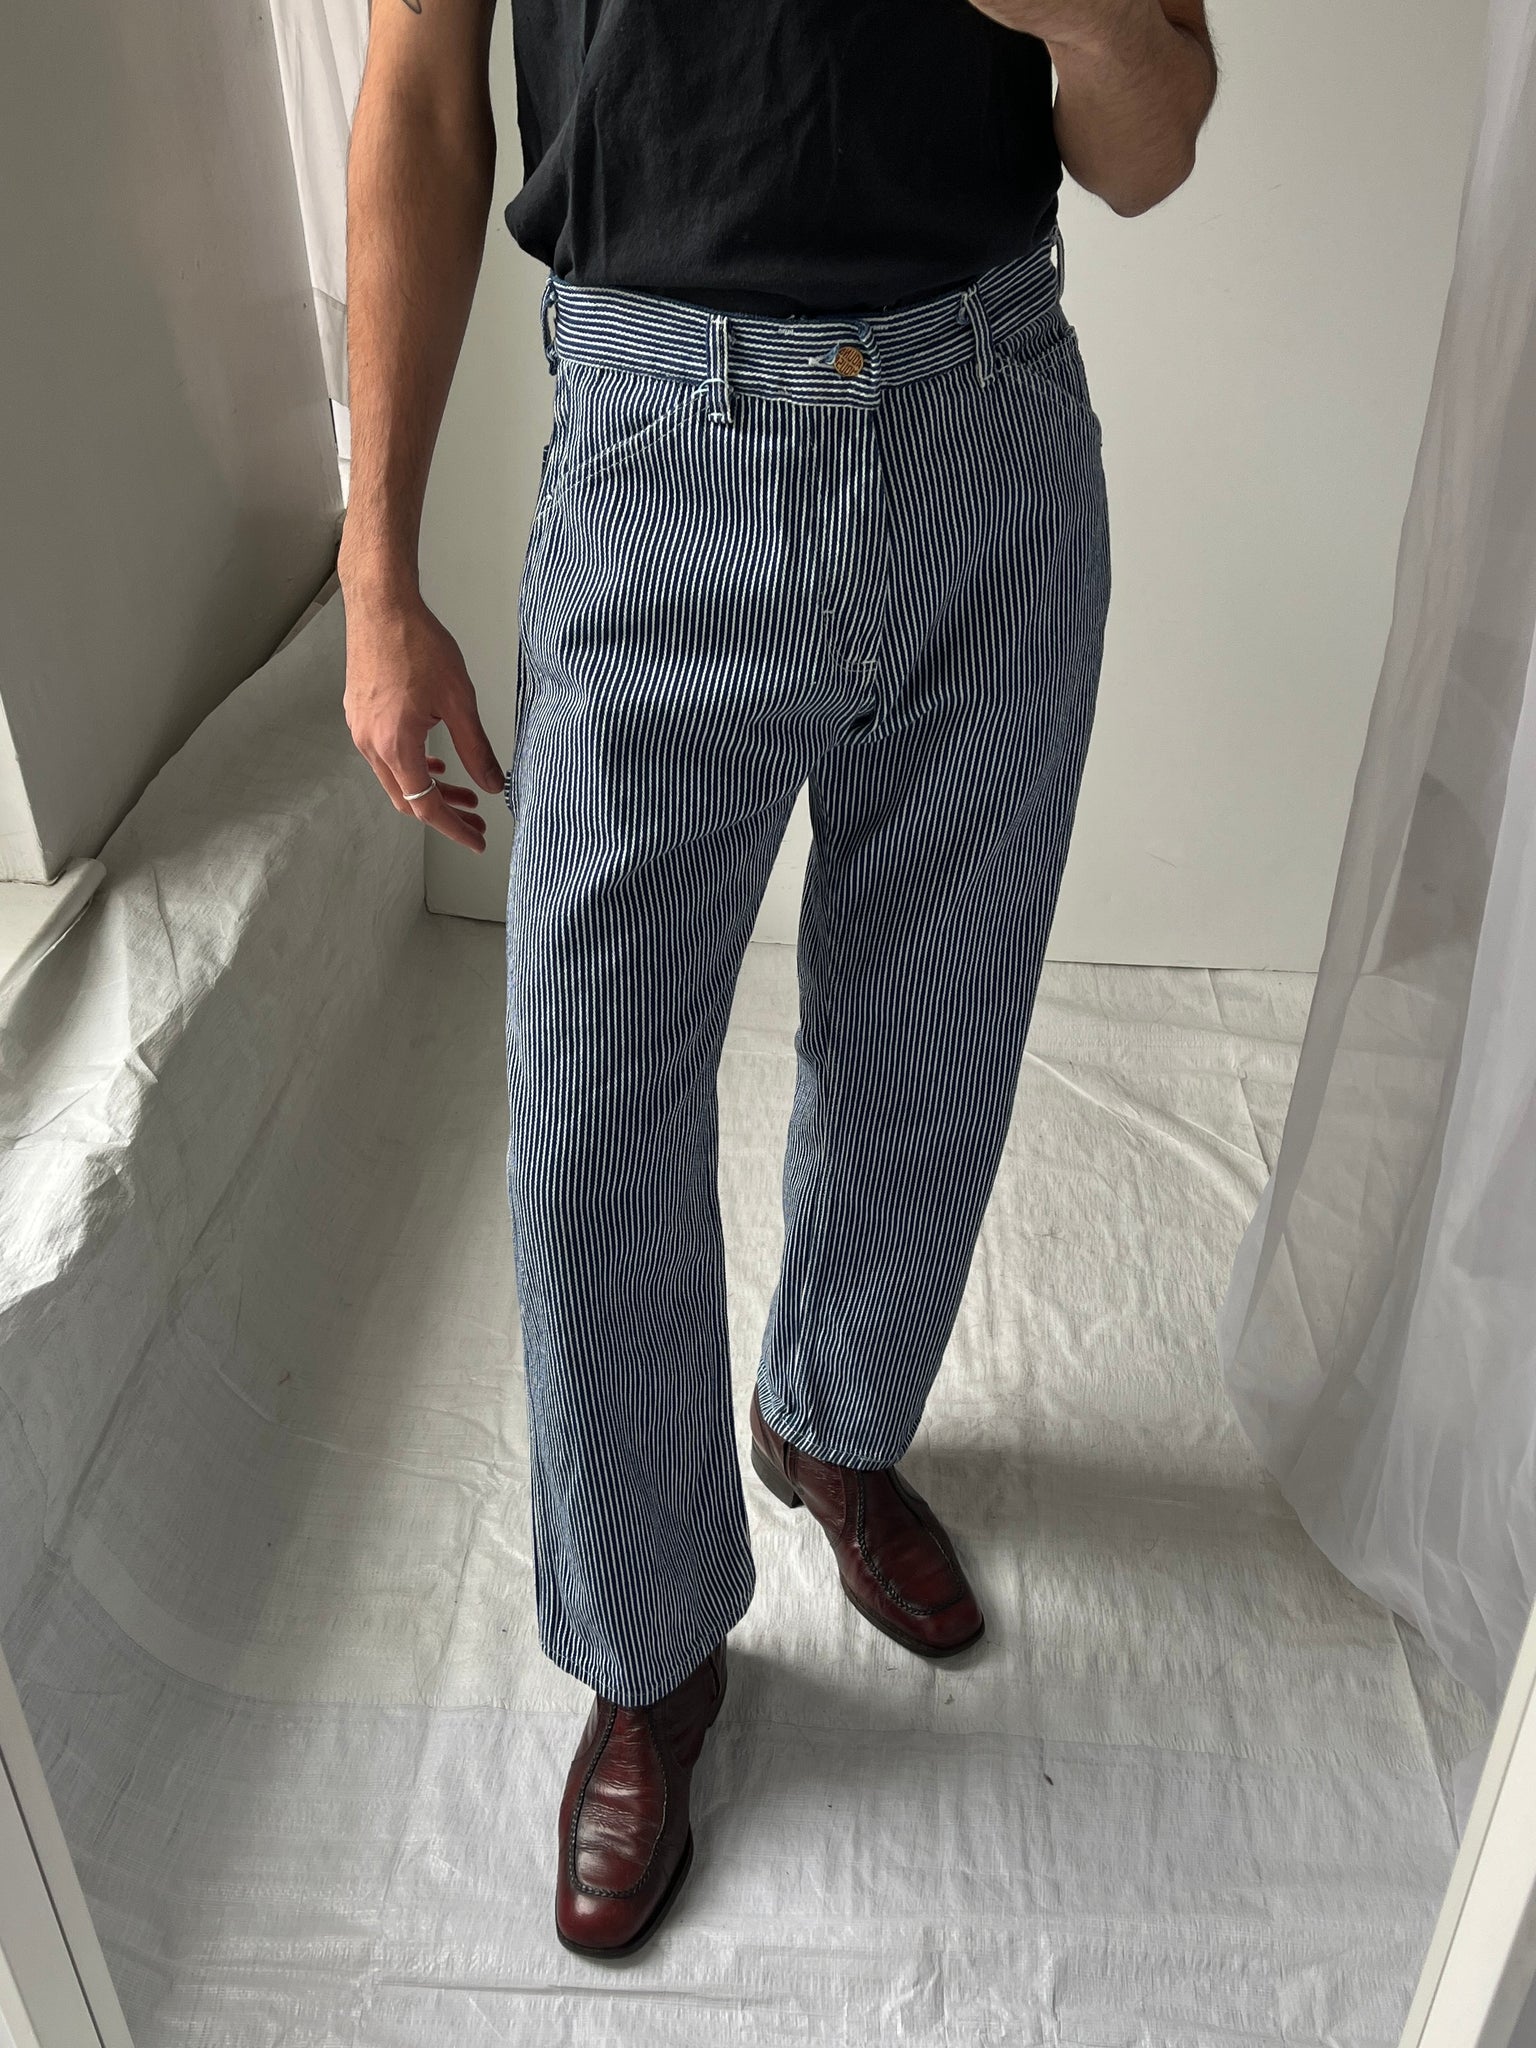 Roundhouse railroad trouser